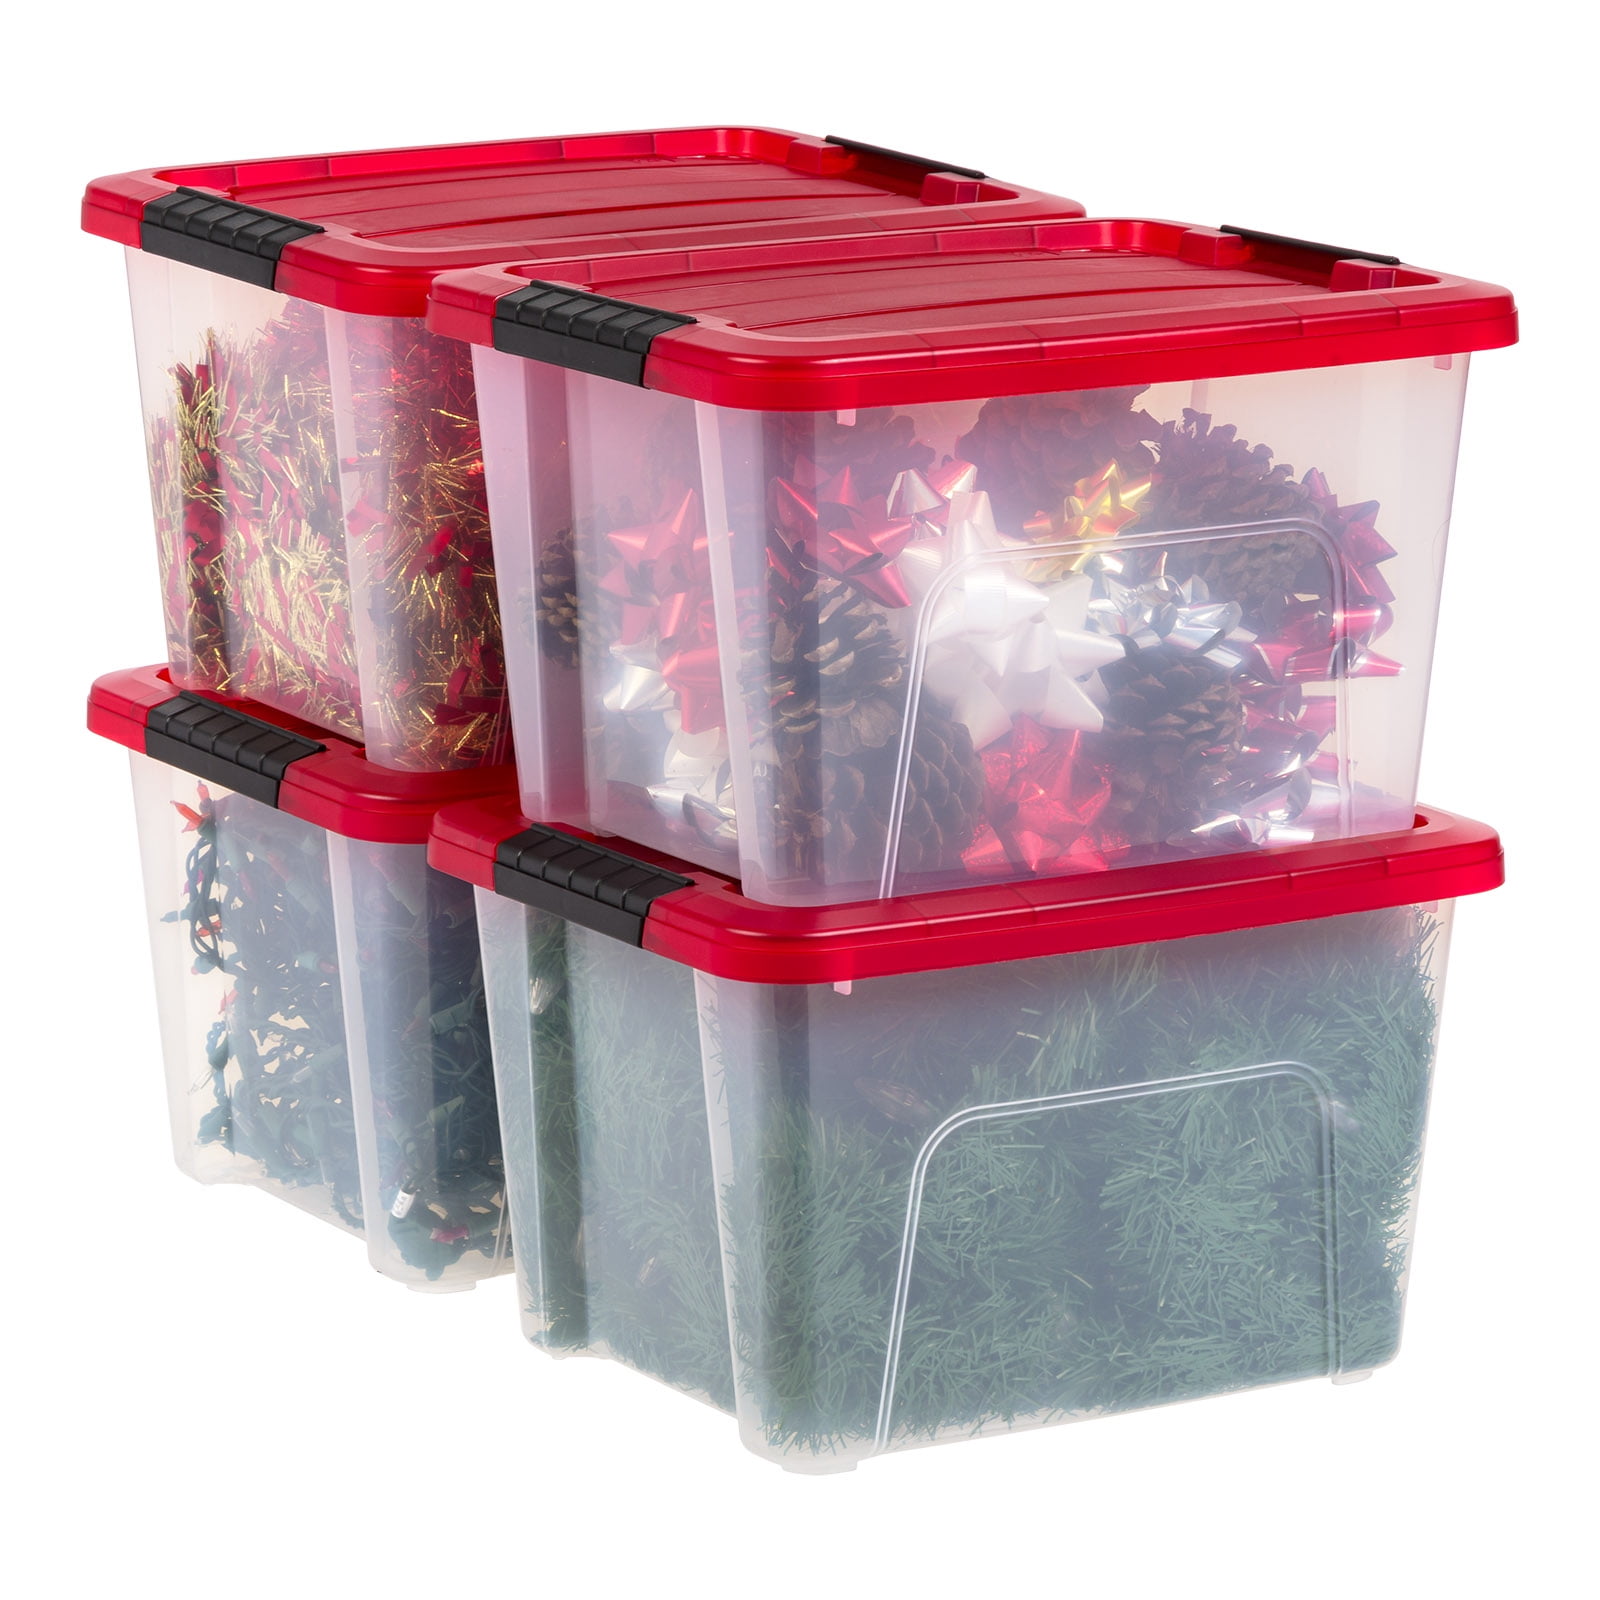 STORAGE BOX CONTAINERS BINS PLASTIC BOXES WITH LIDS STACKABLE TOTES  ORNAMENT 4PK